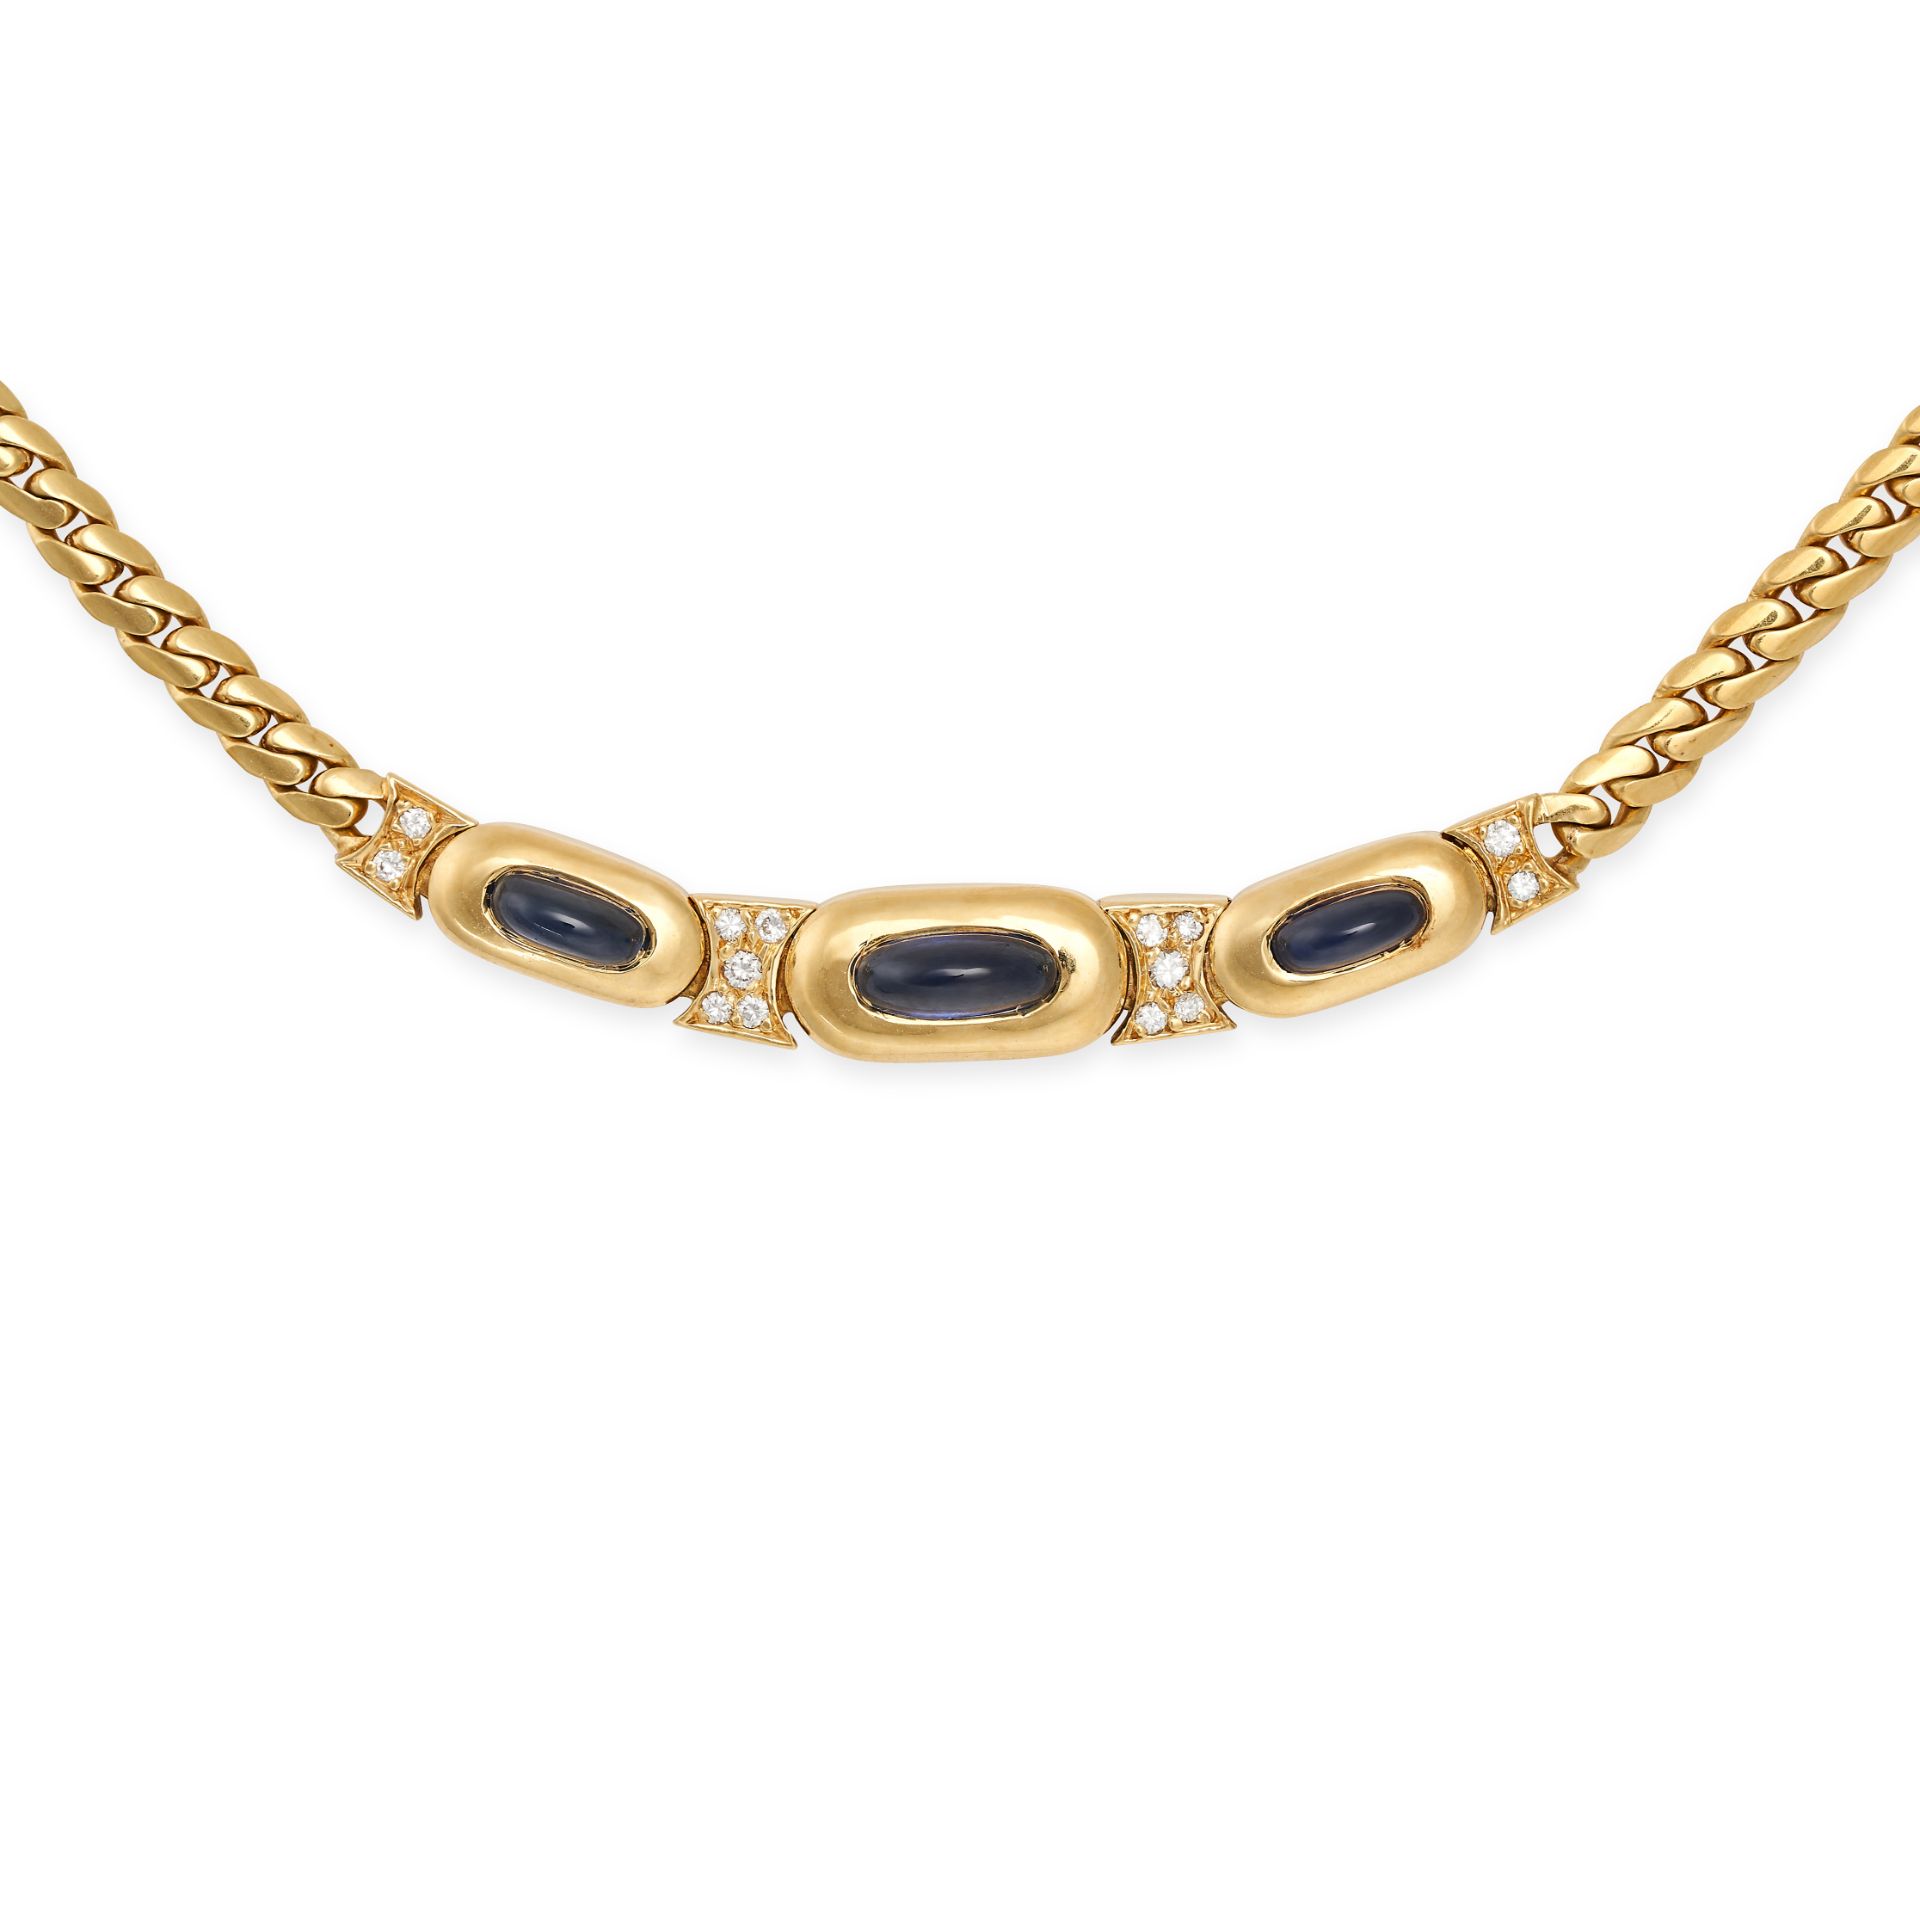 BOUCHERON, A SAPPHIRE AND DIAMOND NECKLACE in 18ct yellow gold, set with three cabochon sapphires...